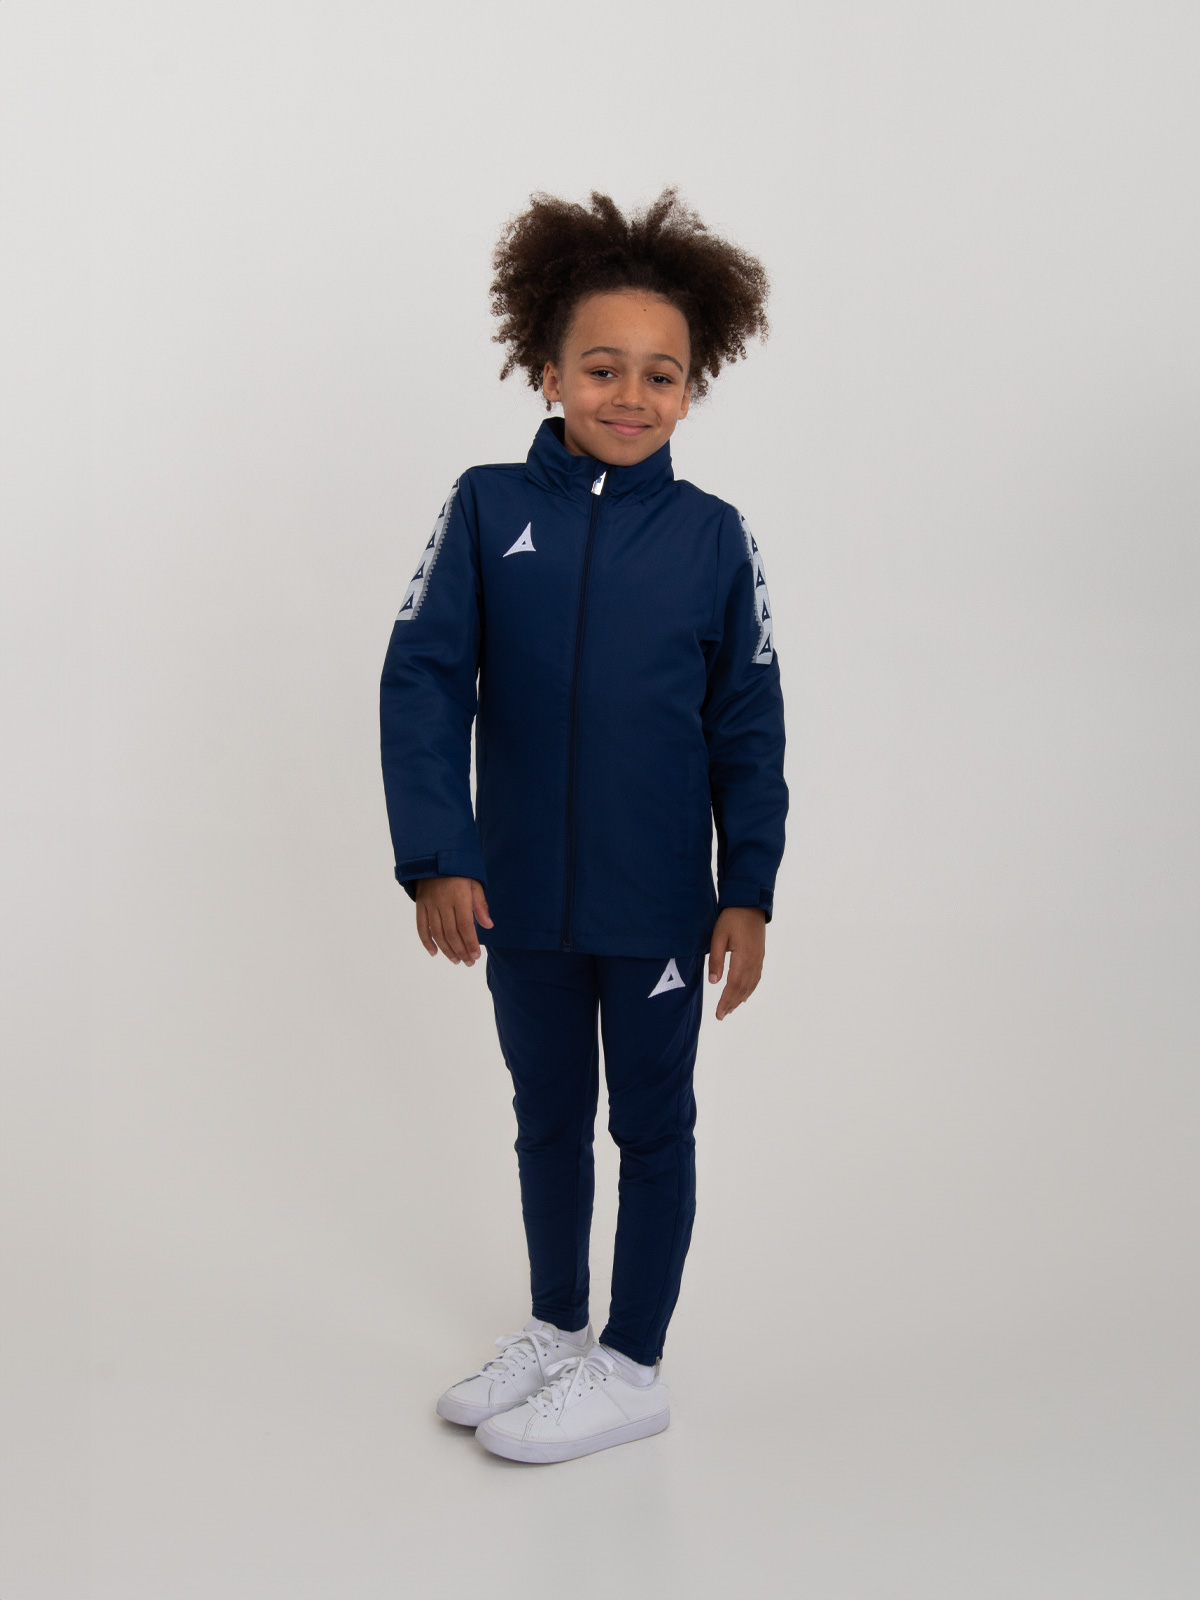 a junior rain jacket in navy blue is being worn by a young child